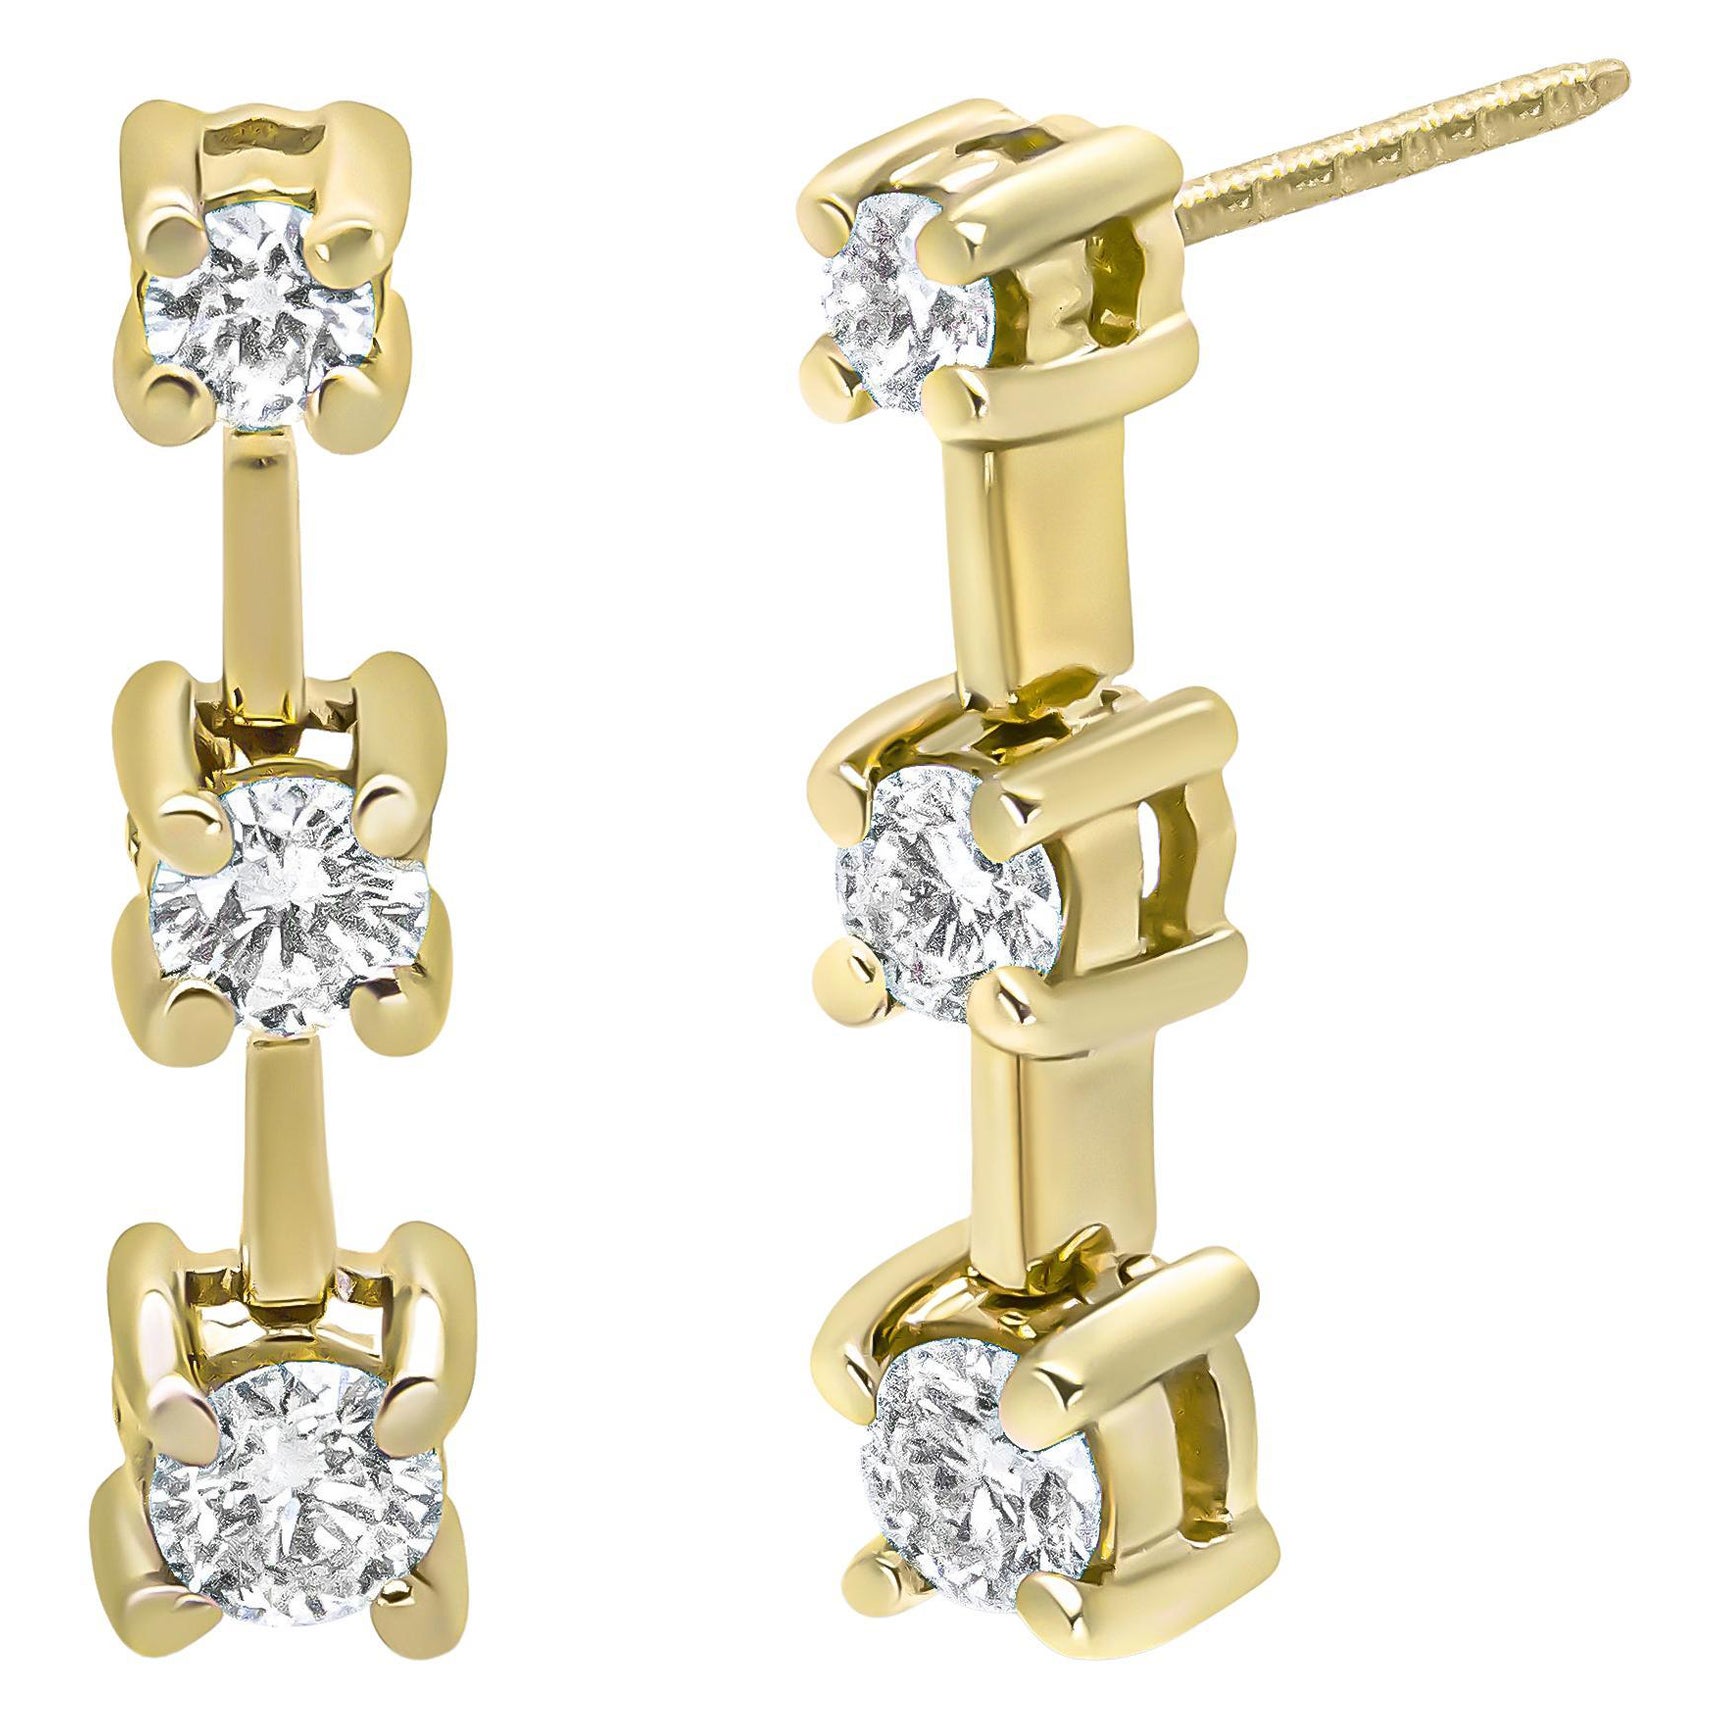 14K Yellow Gold Exquisite Trillion Cut Diamond Stud Earrings | Limited  Edition - Houston Engagement Rings Store